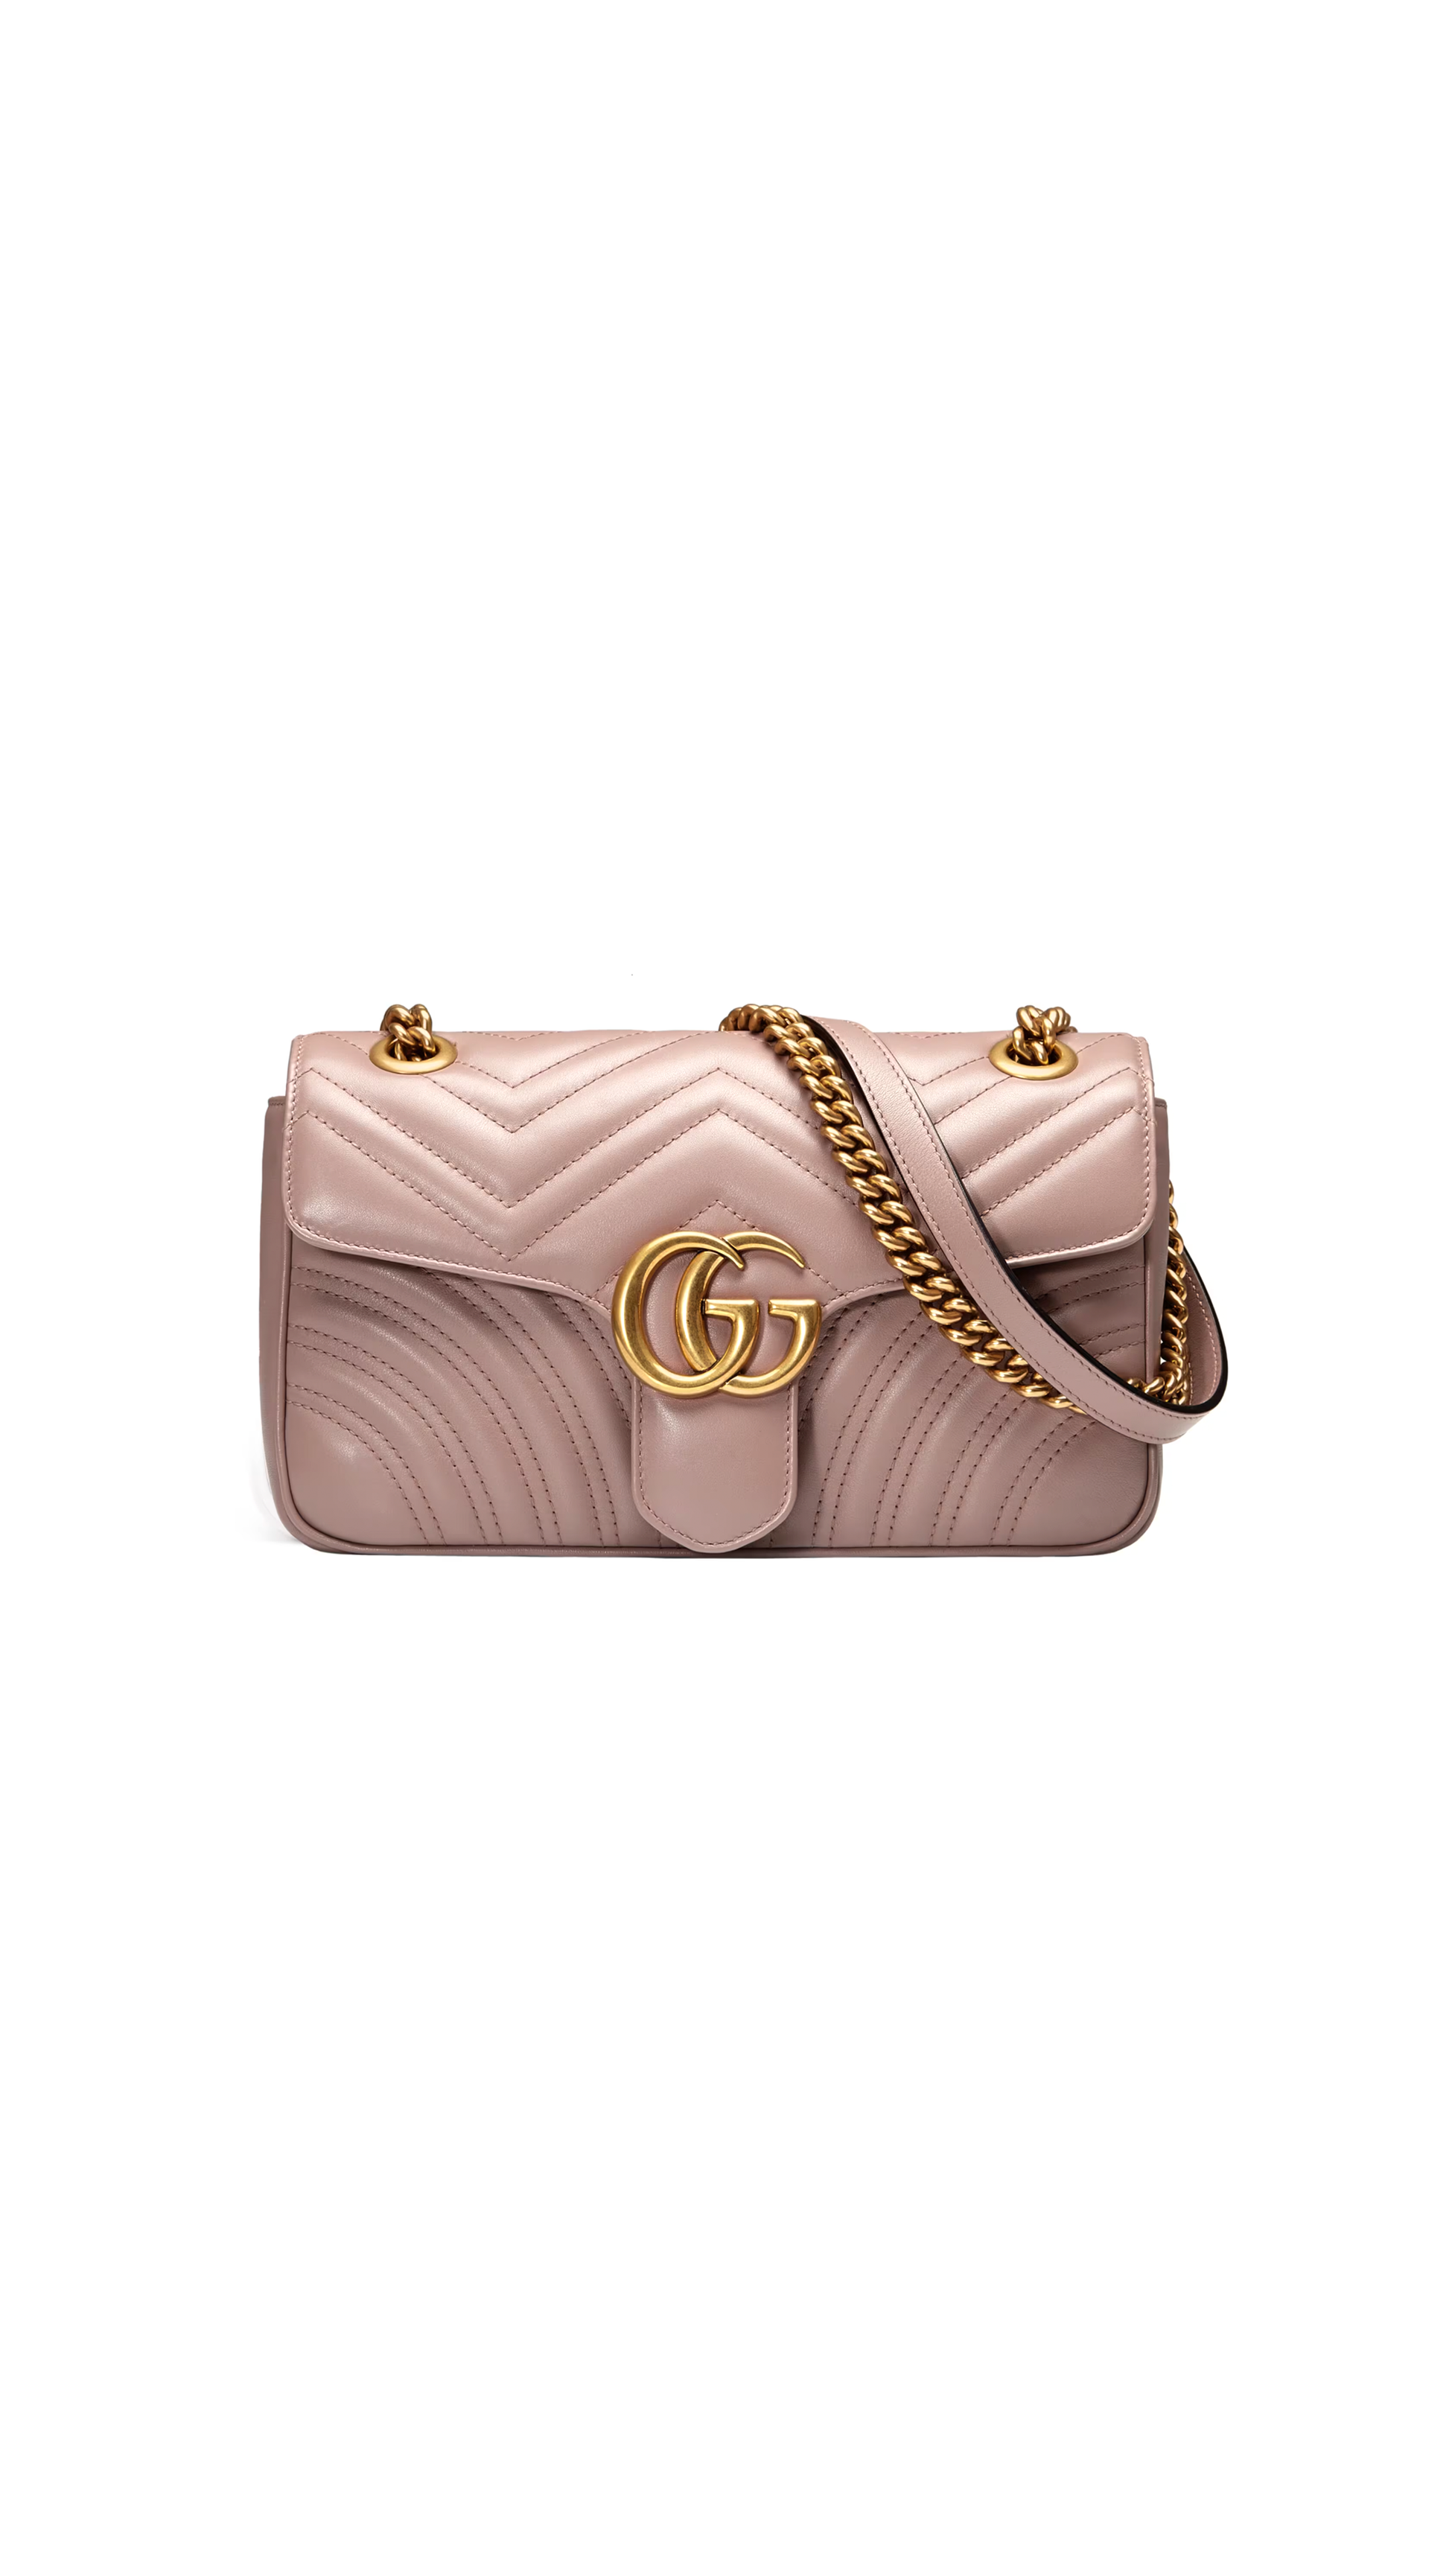 Gucci GG Marmont Small Shoulder Bag Dusty Pink